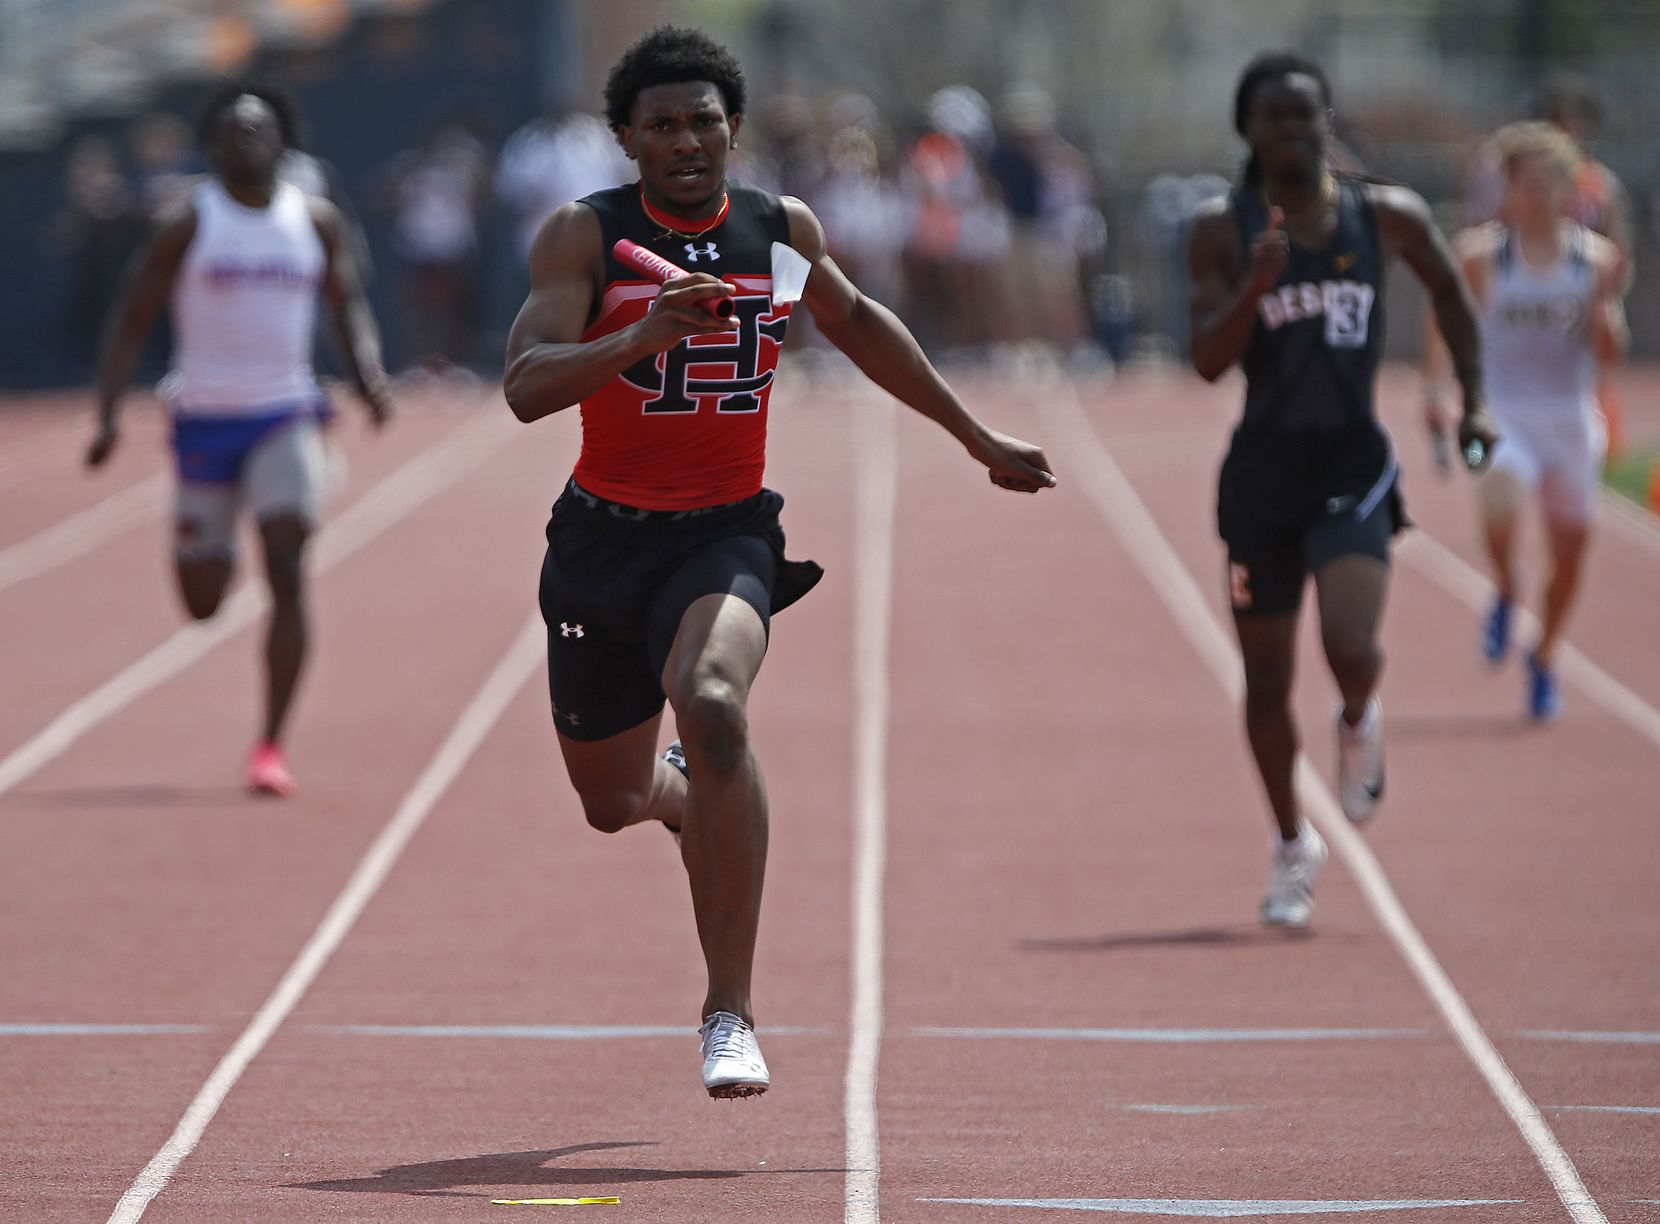 Diallo Good, 18, finishes first in the boys 4x100 for Cedar Hill High School during the Jesuit-Sheaner Relays held at Jesuit College Preparatory School in Dallas on Saturday, March 27, 2021.